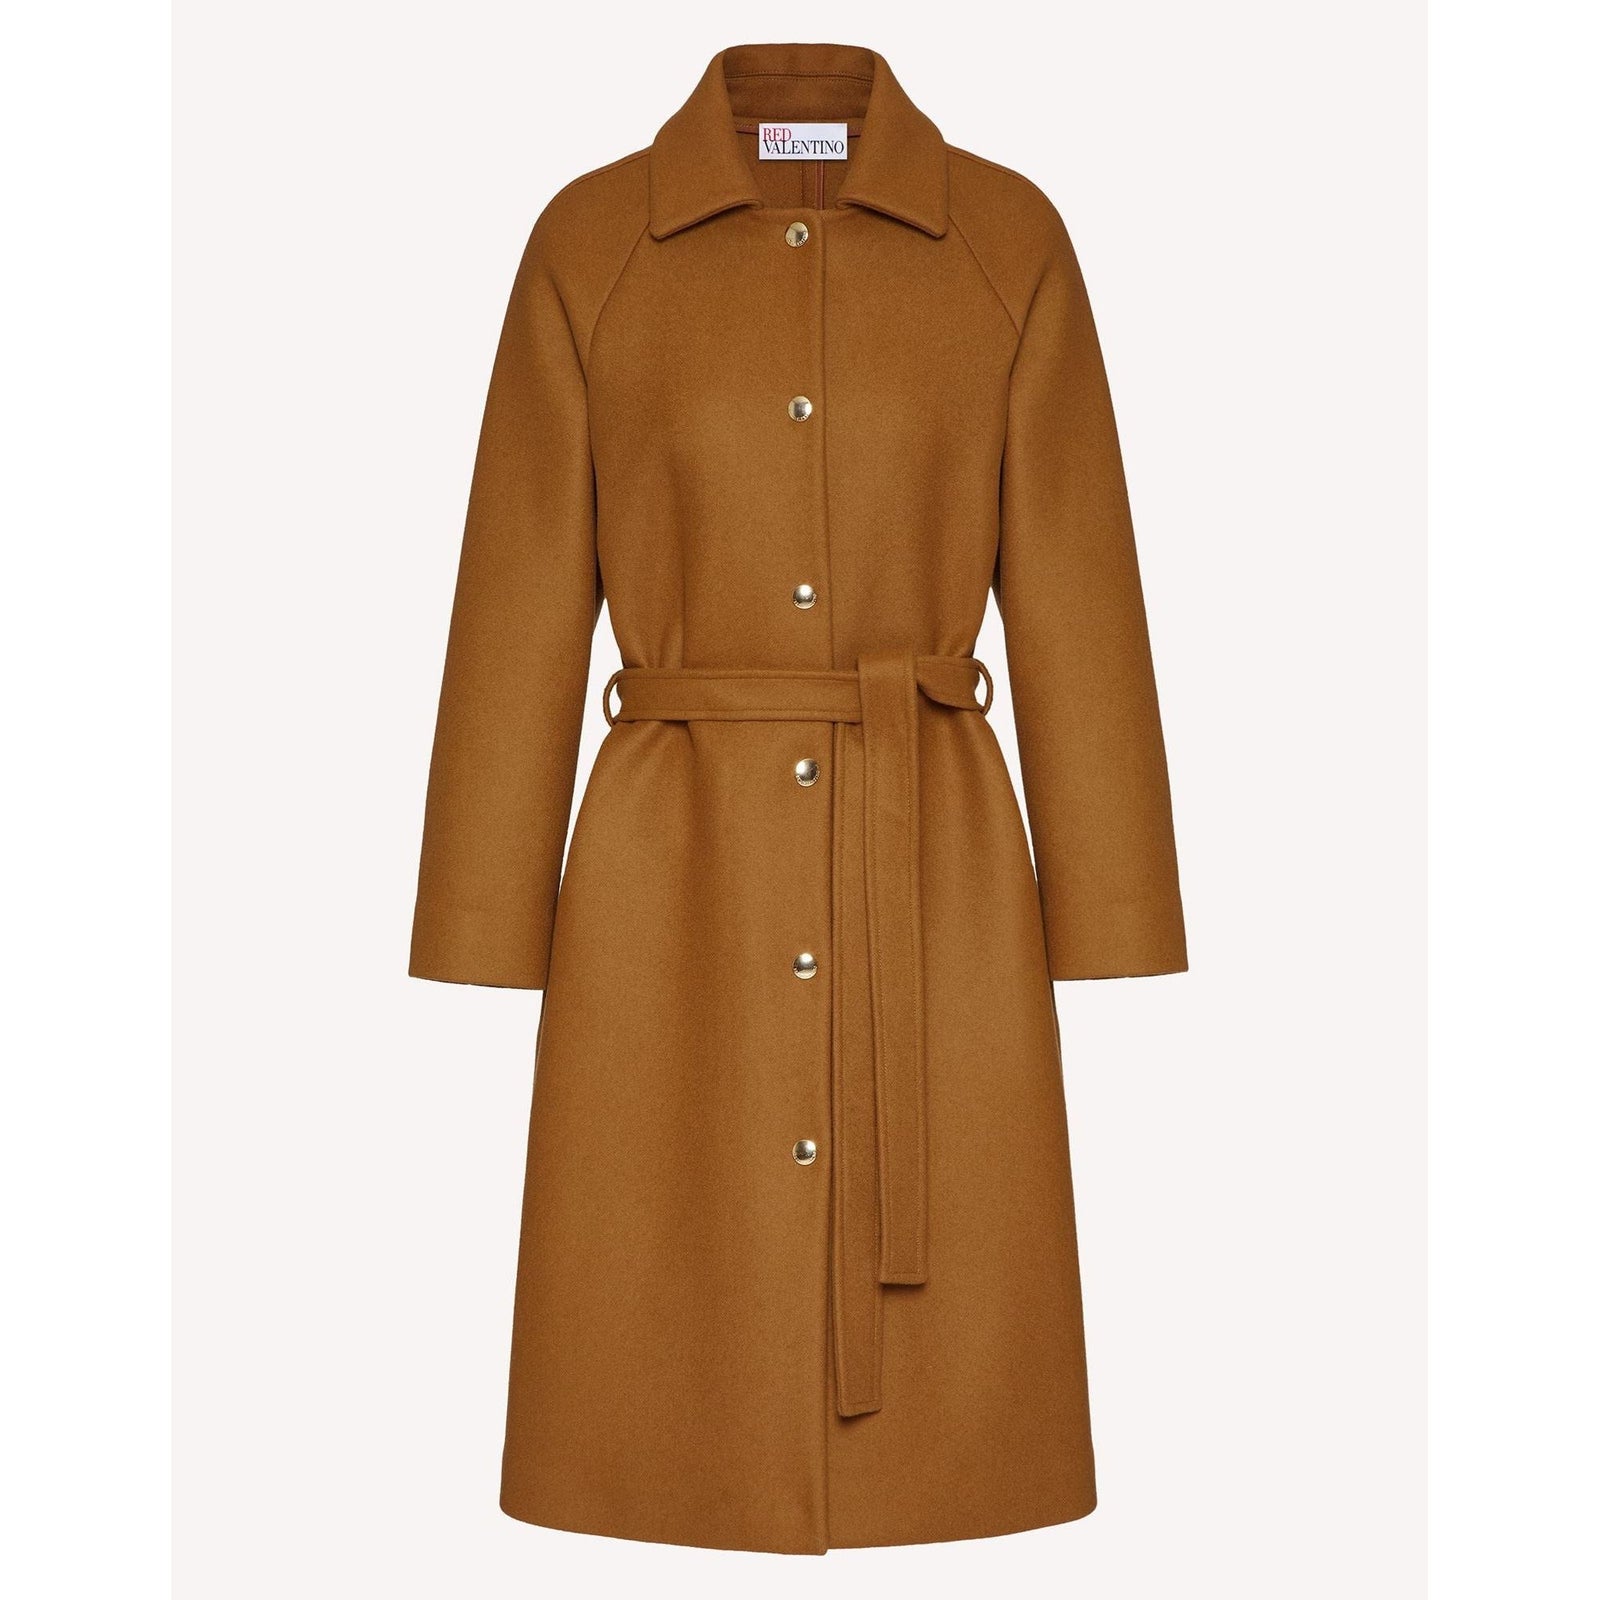 RED VALENTINO CASHMERE WOOL COAT WITH BELT - Yooto